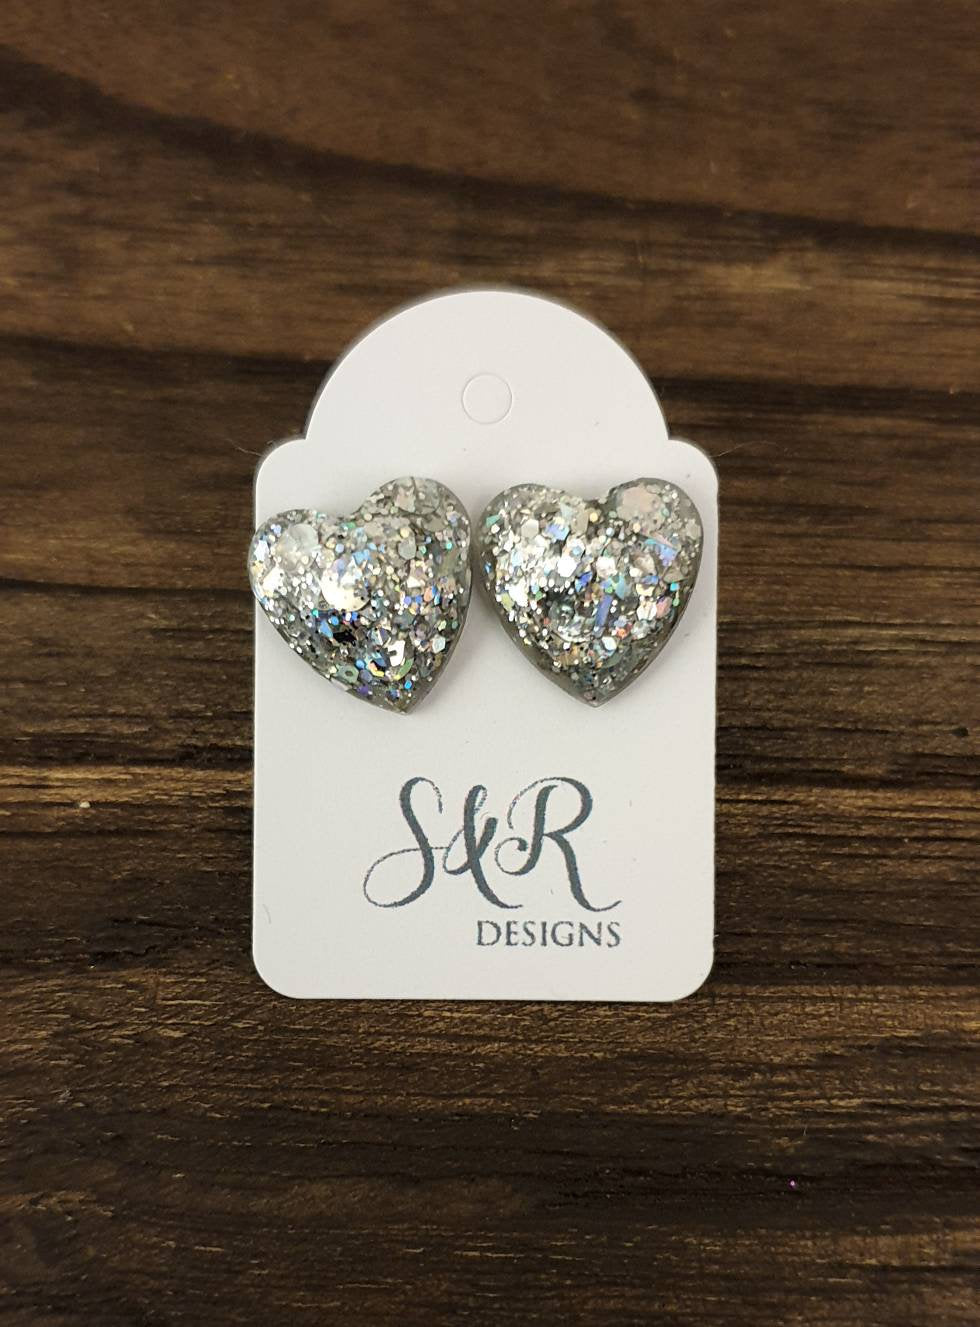 Faceted Heart Resin Stud Earrings, Sparkly Silver Holographic Mix Glitter, Stainless Steel 14mm Hearts